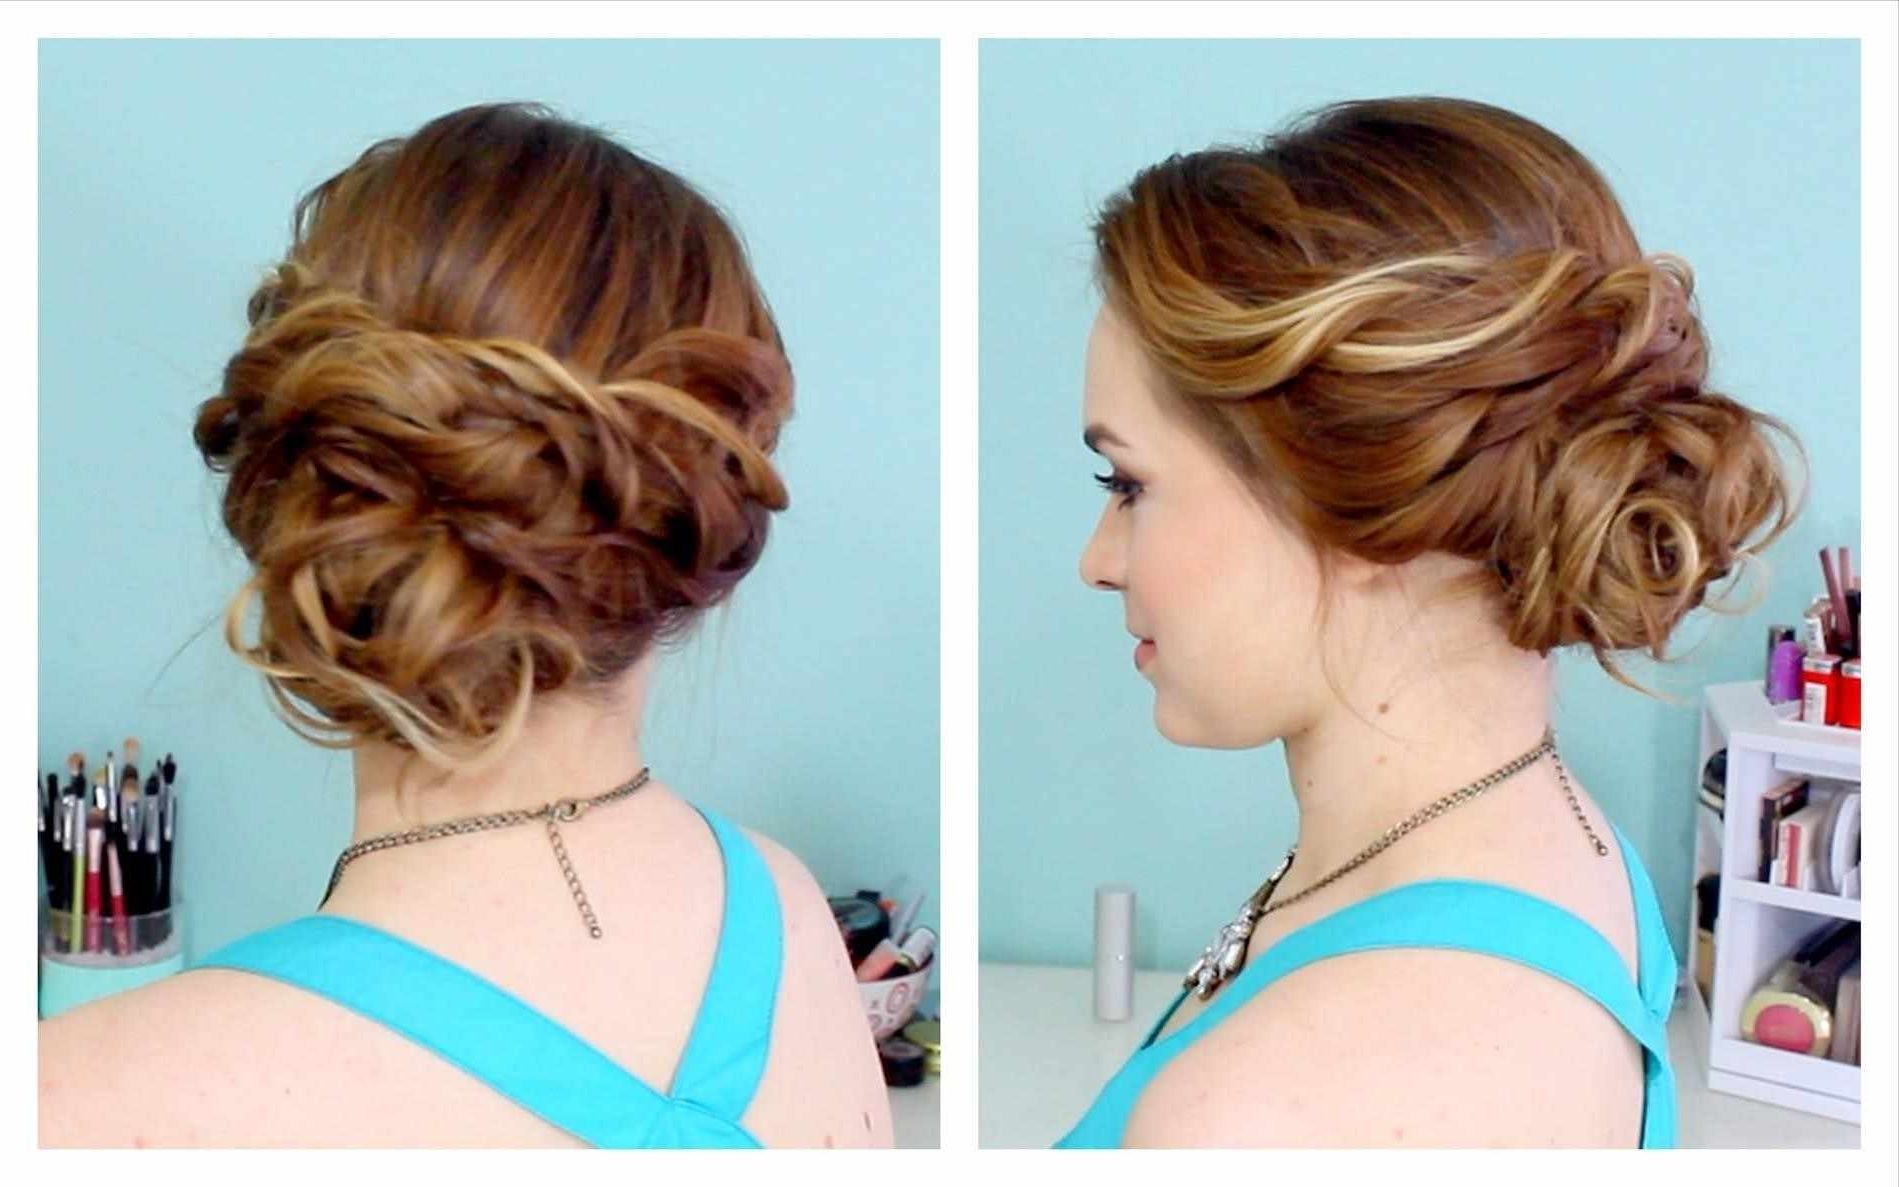 Amusing Loose Buns Hairstyles About Indian Low Bun Hairstyles Loose For Updo Low Bun Hairstyles (View 6 of 15)